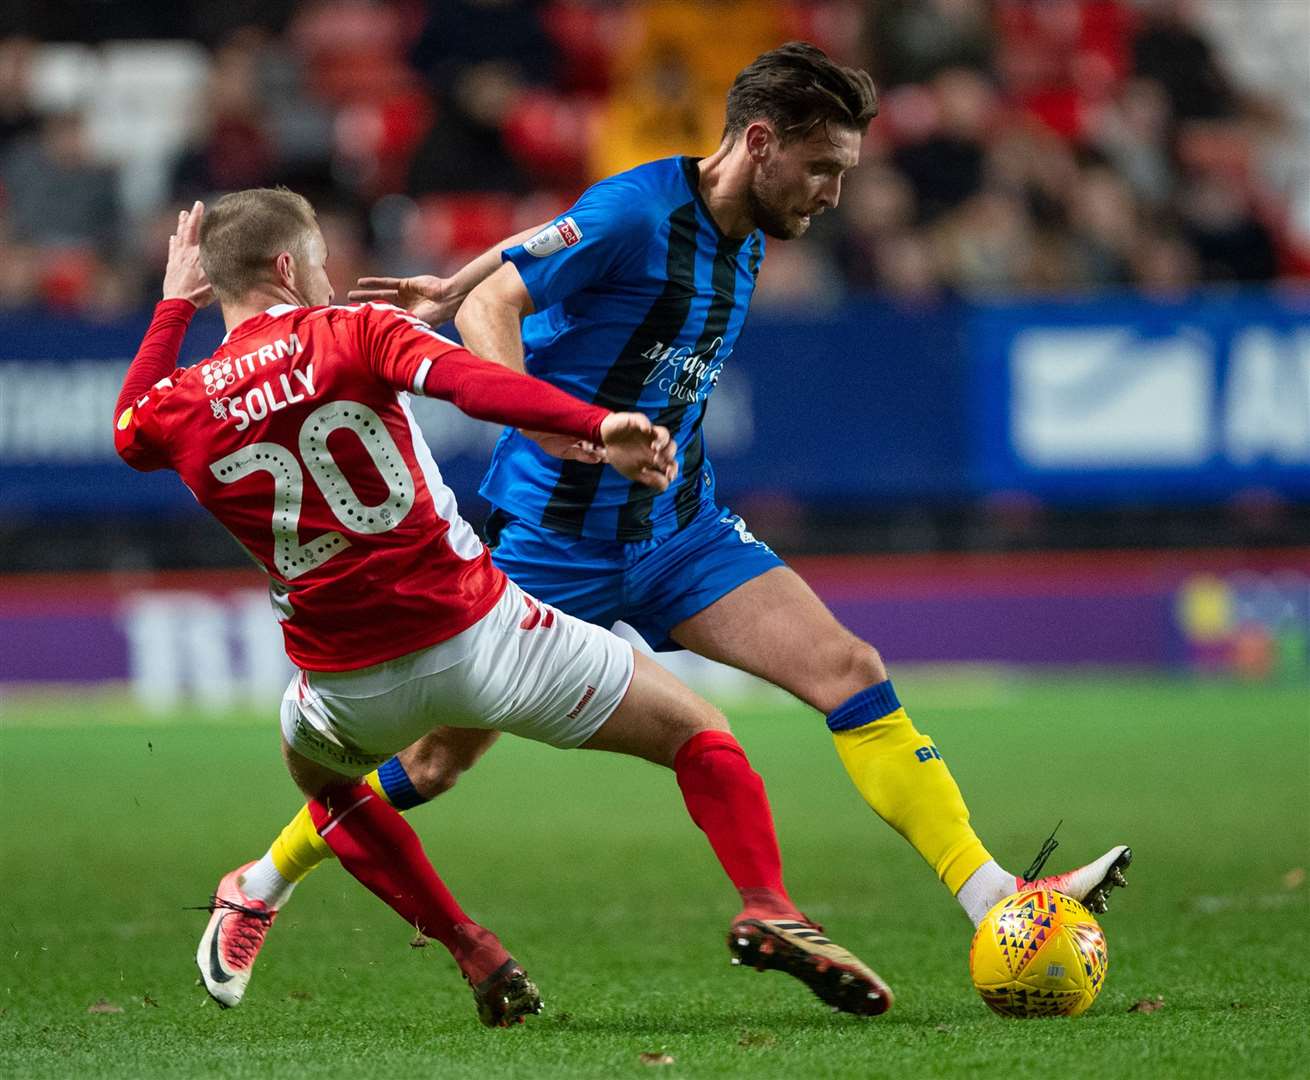 Luke O'Neill of Gillingham is challenged by Charlton's Chris Solly in 2018 - the duo will be team-mates at Ebbsfleet this season. Picture: Ady Kerry